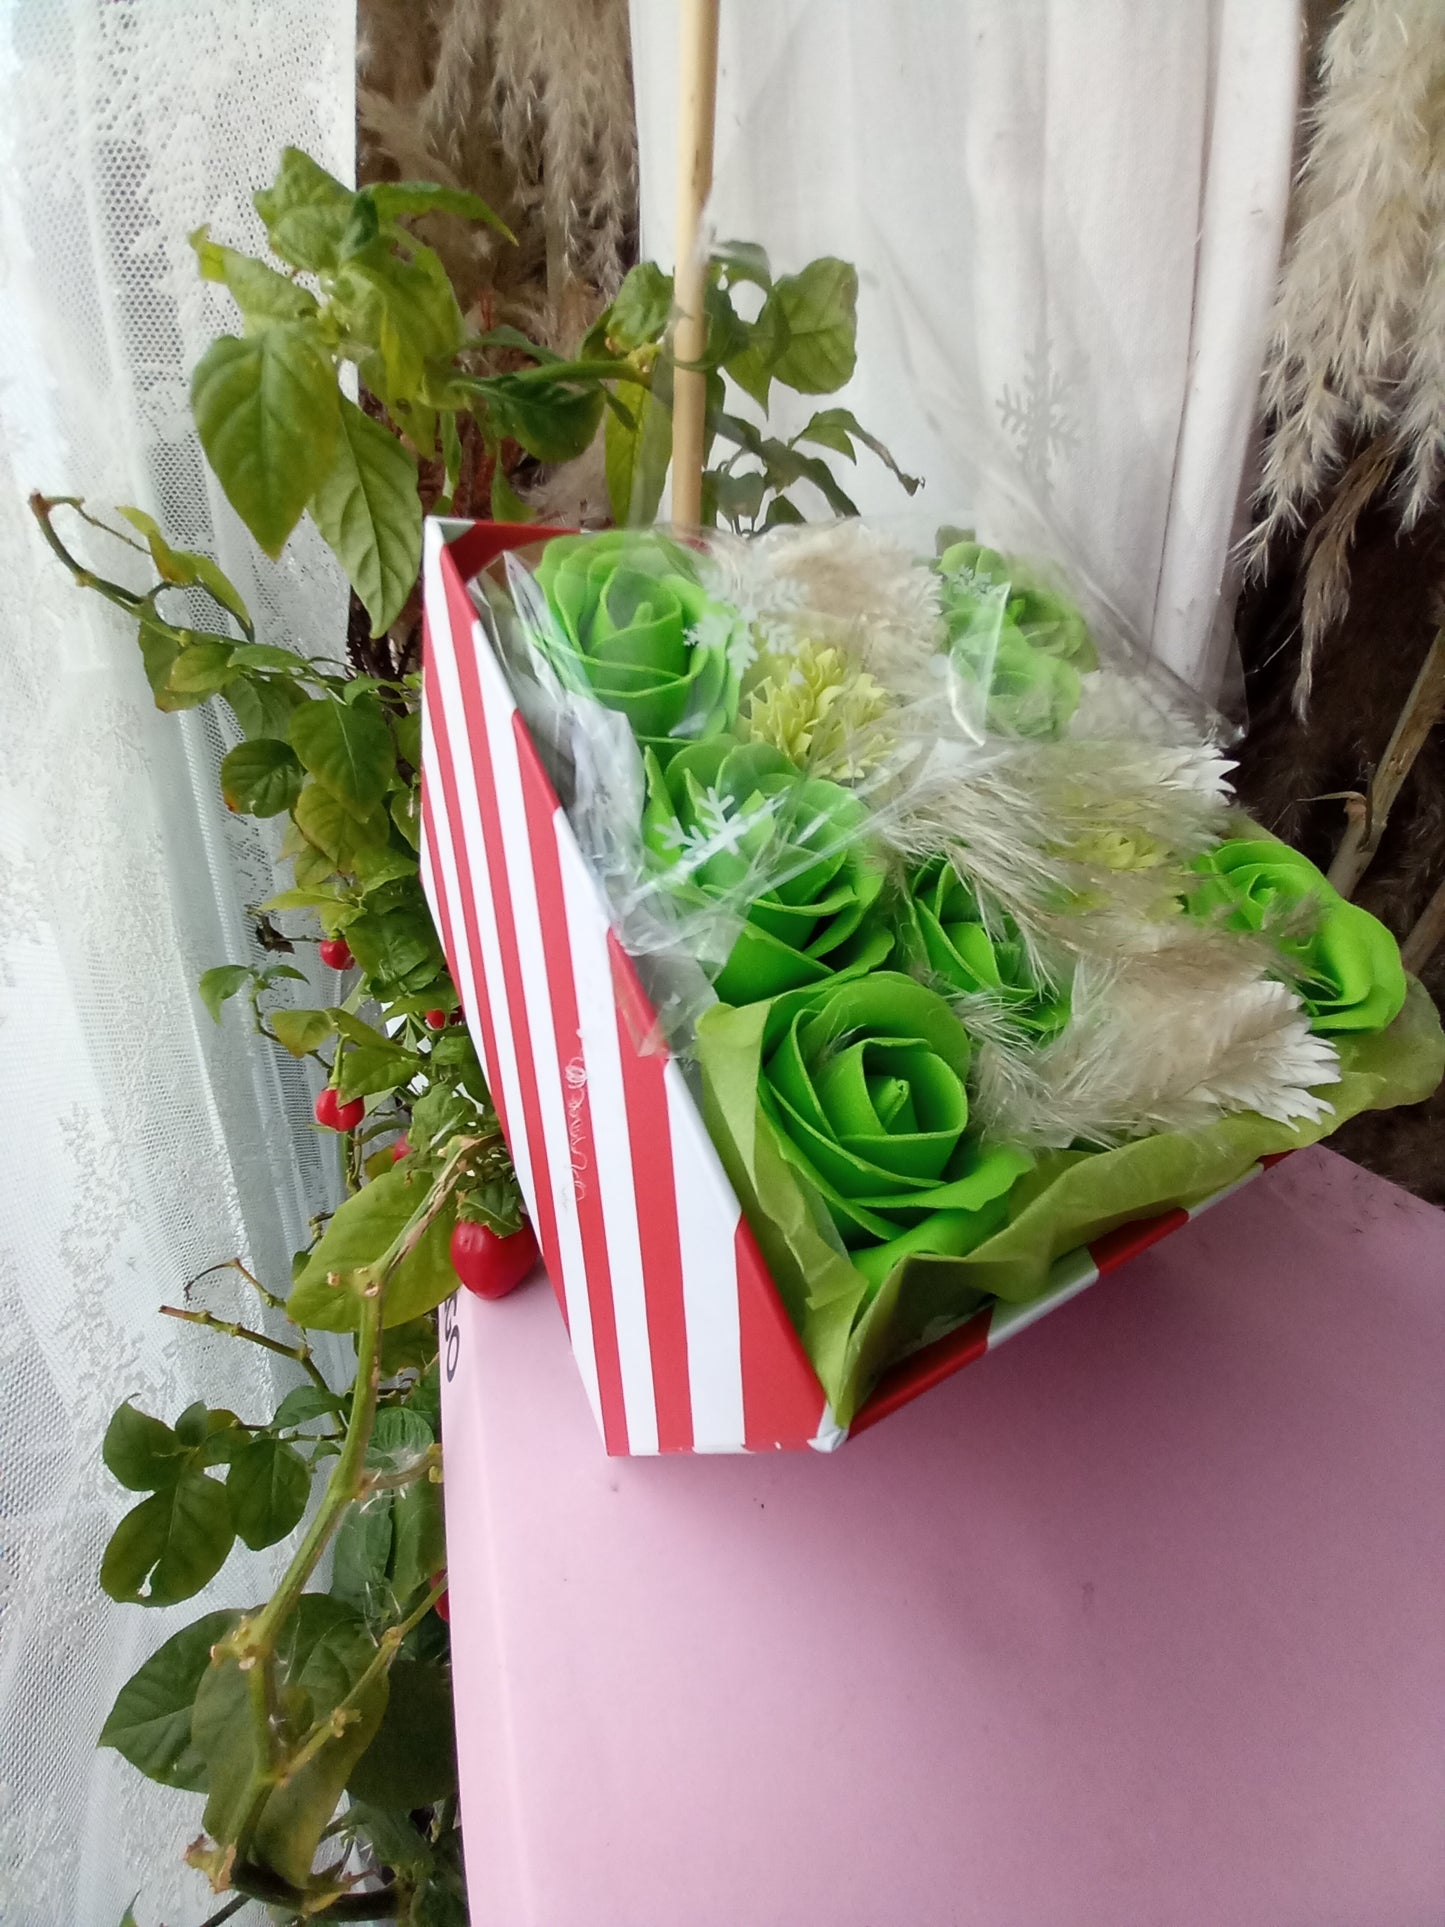 GREEN ON GREEN AND WHITE FLOWER SOAP IN CANDY CANE DISPLAY BOX